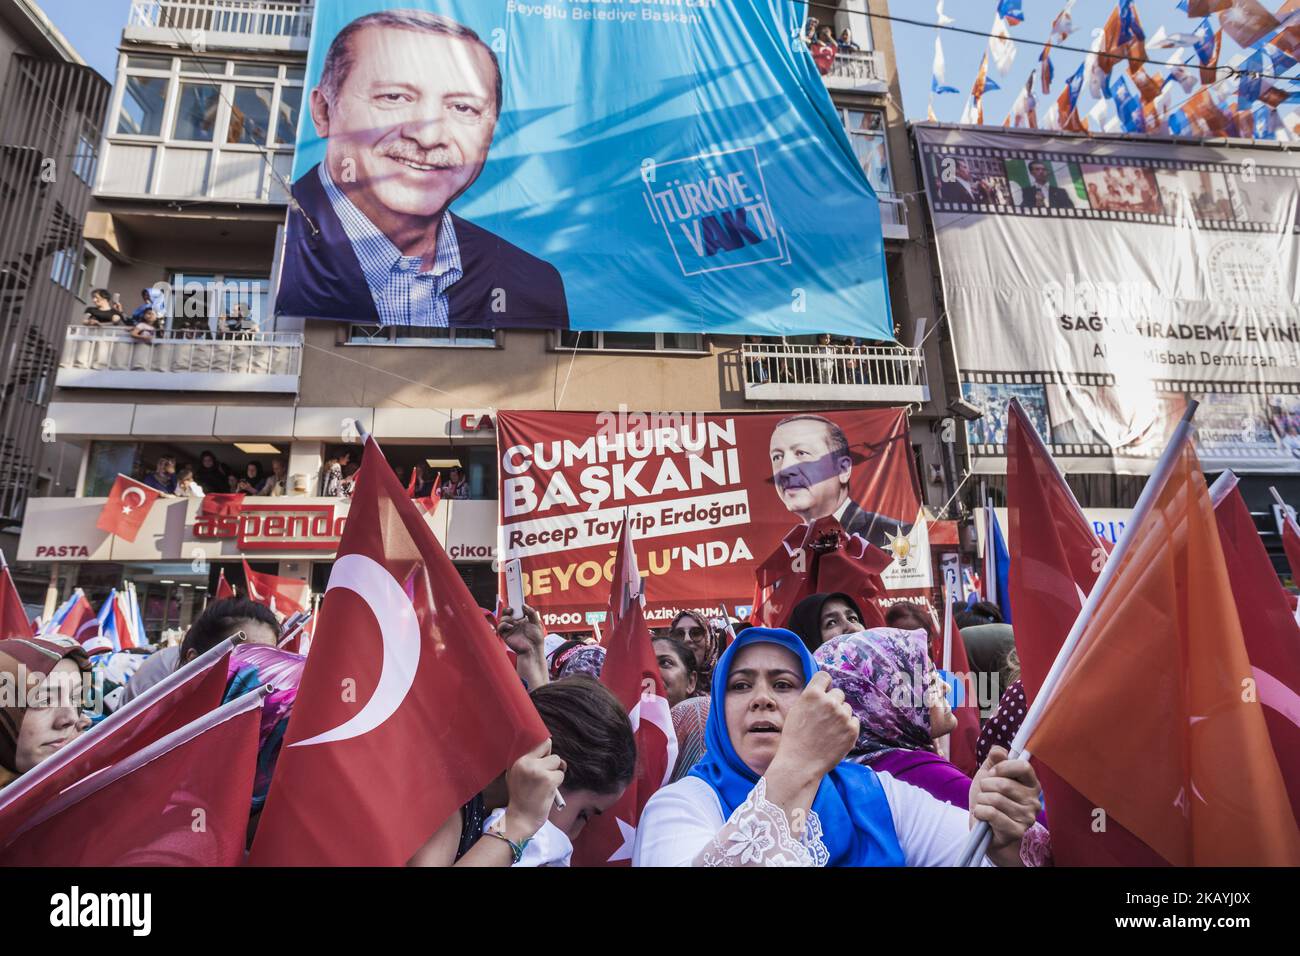 Supporters of Recep Tayyip Erdogan, Turkey's president, attend a pre-election rally in the Atasehir district of Istanbul, Turkey, on Friday, June 22, 2018. With less than 48 hours before polls open in Turkey, the two main candidates sought to rally their supporters with mass gatherings in the biggest cities. (Photo by Celestino Arce/NurPhoto) Stock Photo